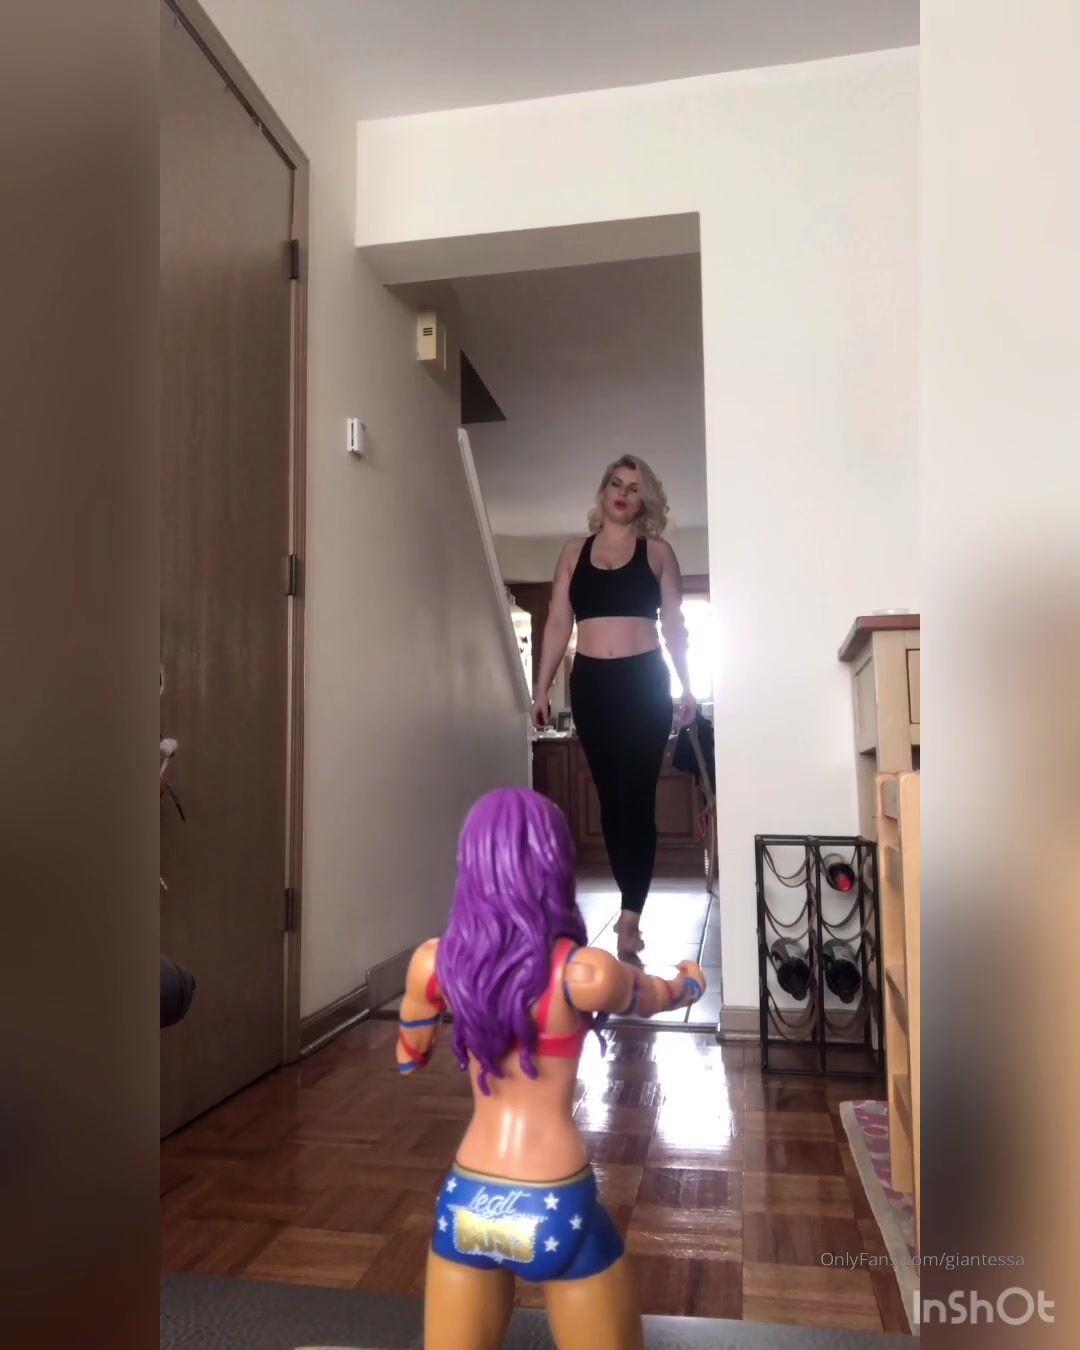 X Sex Wwe Free Fhagt - Giantessa789 sexy wwe wrestler girl challenged giantessa to a fight and she  gets to be teased by her fe xxx onlyfans porn videos - CamStreams.tv